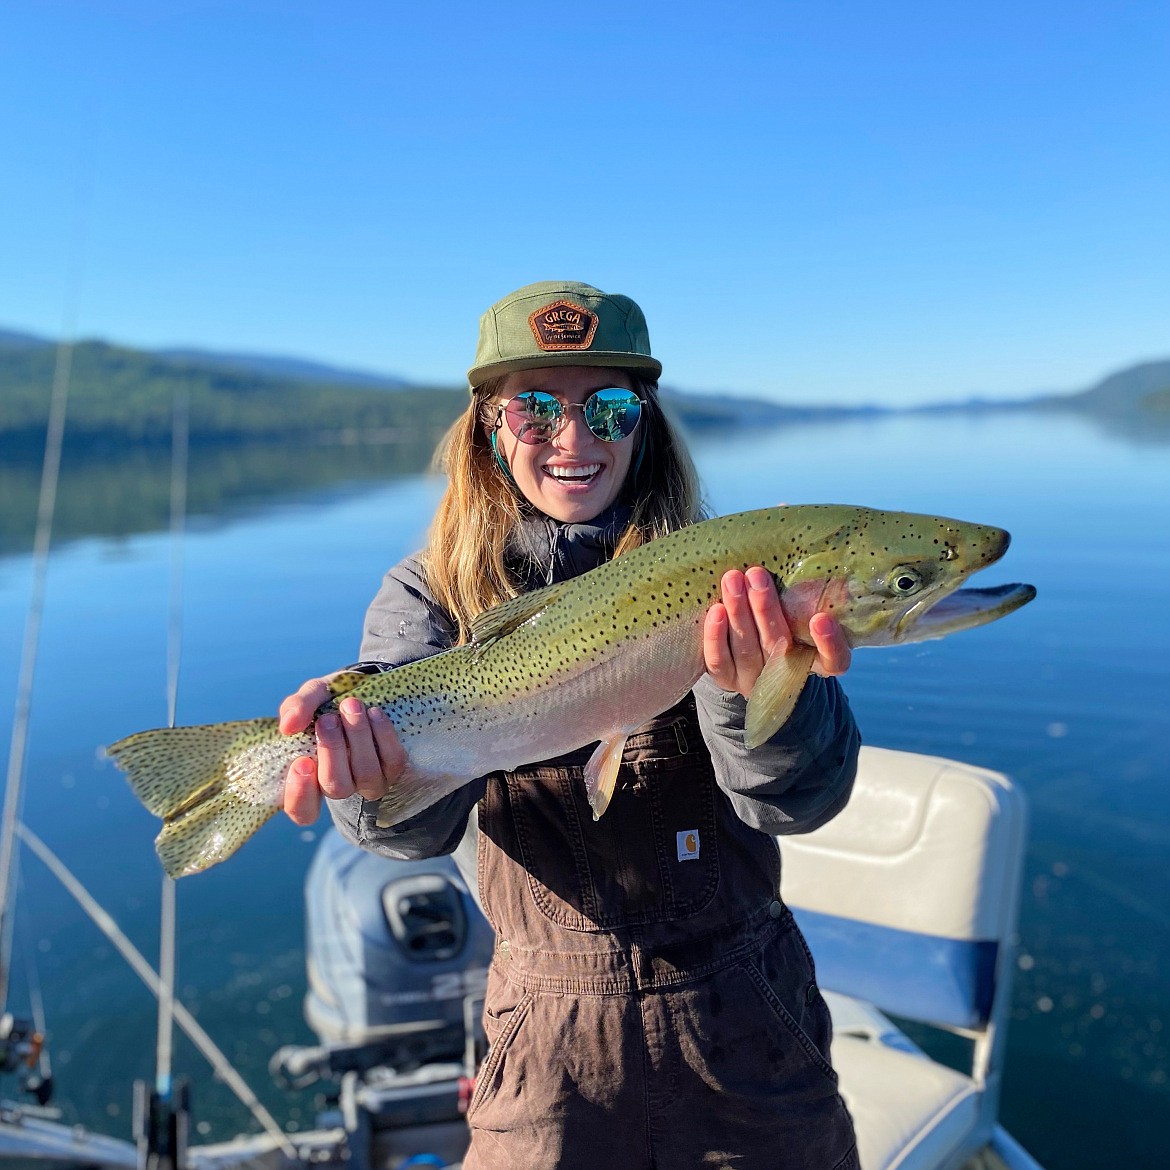 (Photo courtesy of Idaho Fish & Game)
Madison Nackos releases a 24-inch Westslope Cutthroat Trout back into the cool waters of Priest Lake, clinching the current catch-and-release Idaho state record for this species.